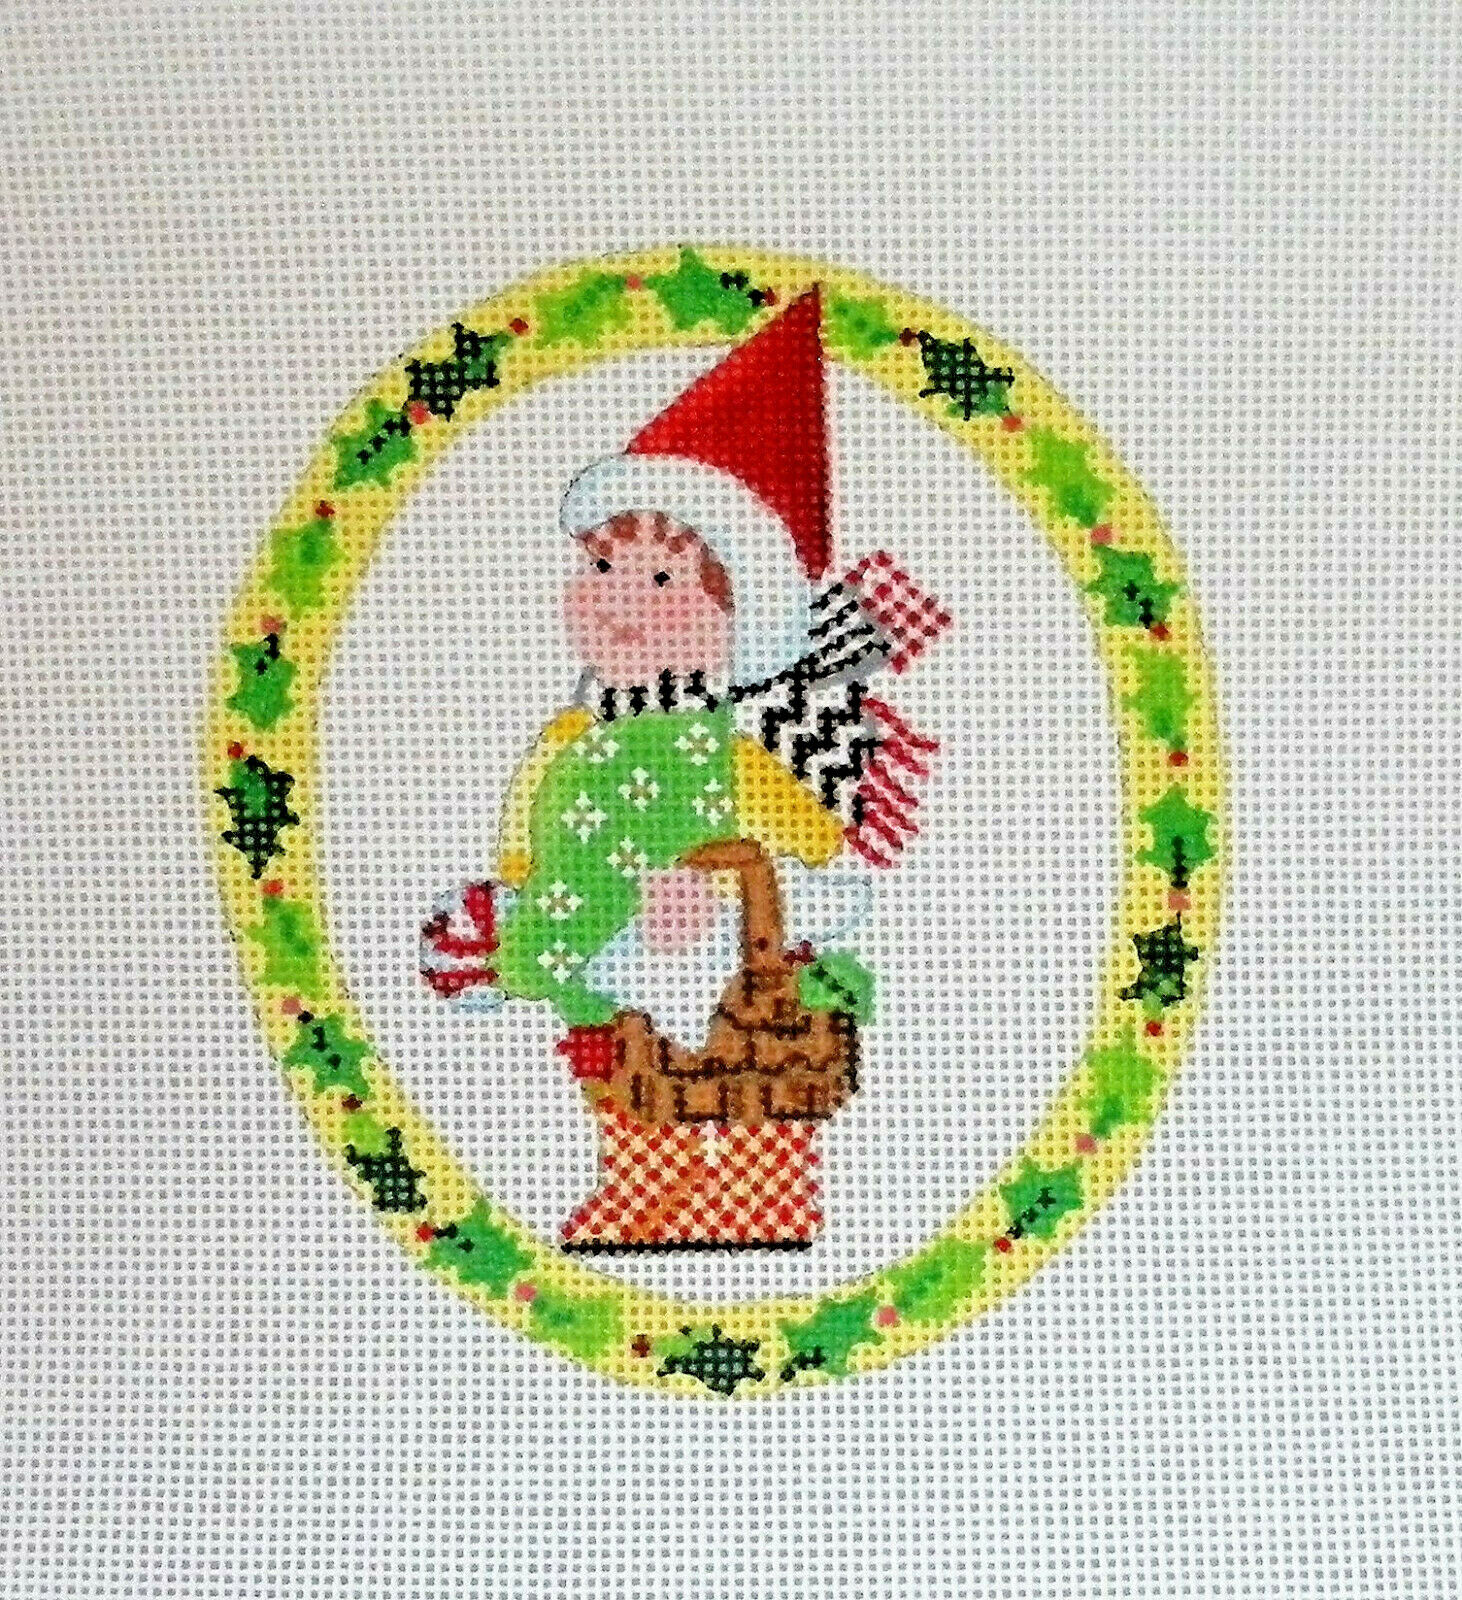 Handpainted Needlepoint Canvas Holly Baby Christmas DeDe ED17005C 4x4.5 18M